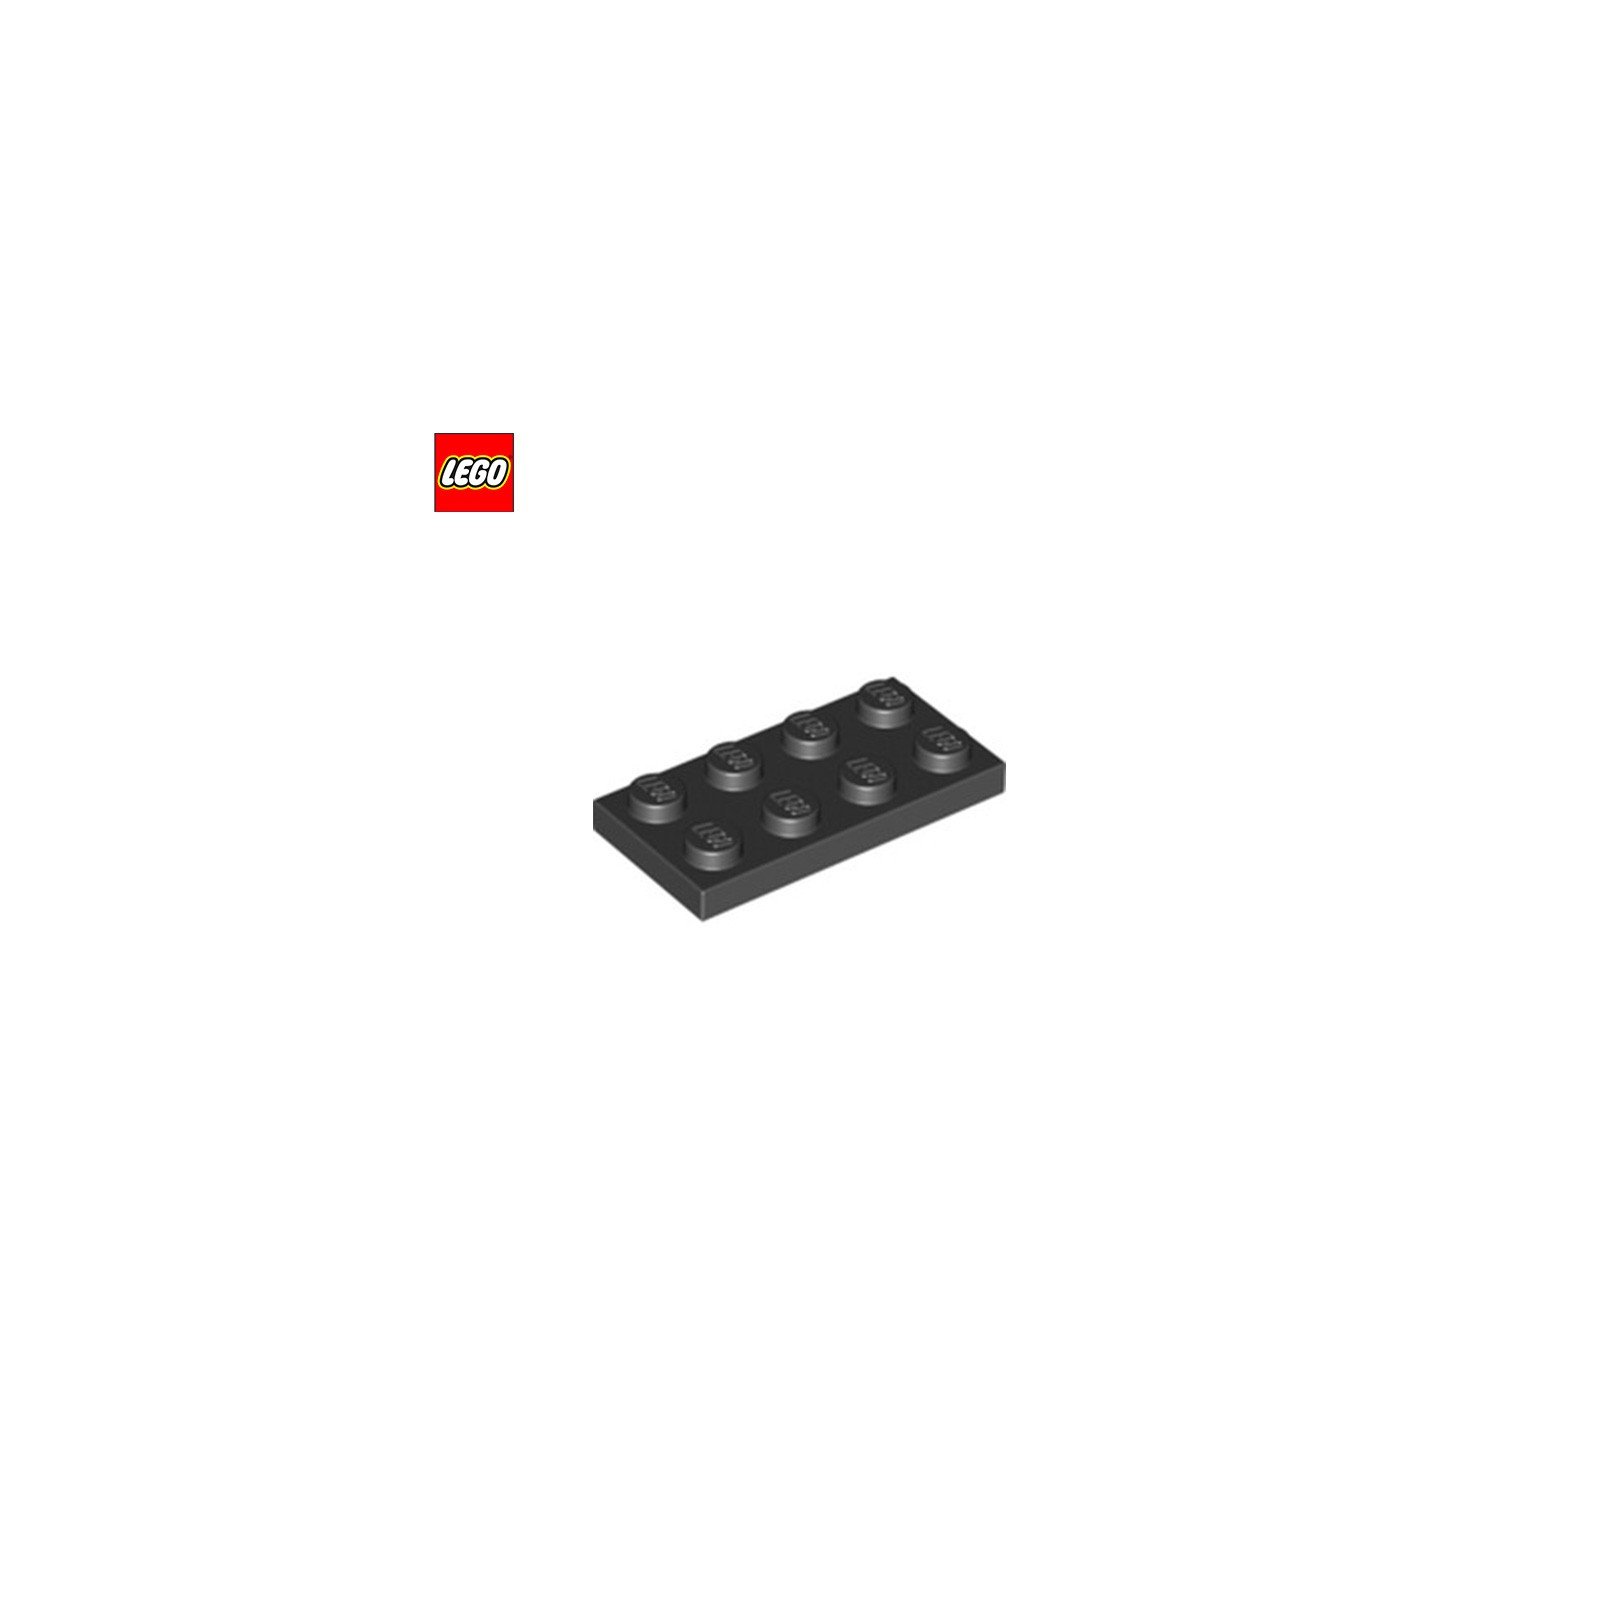 Plate 2x4 - LEGO® Part 3020